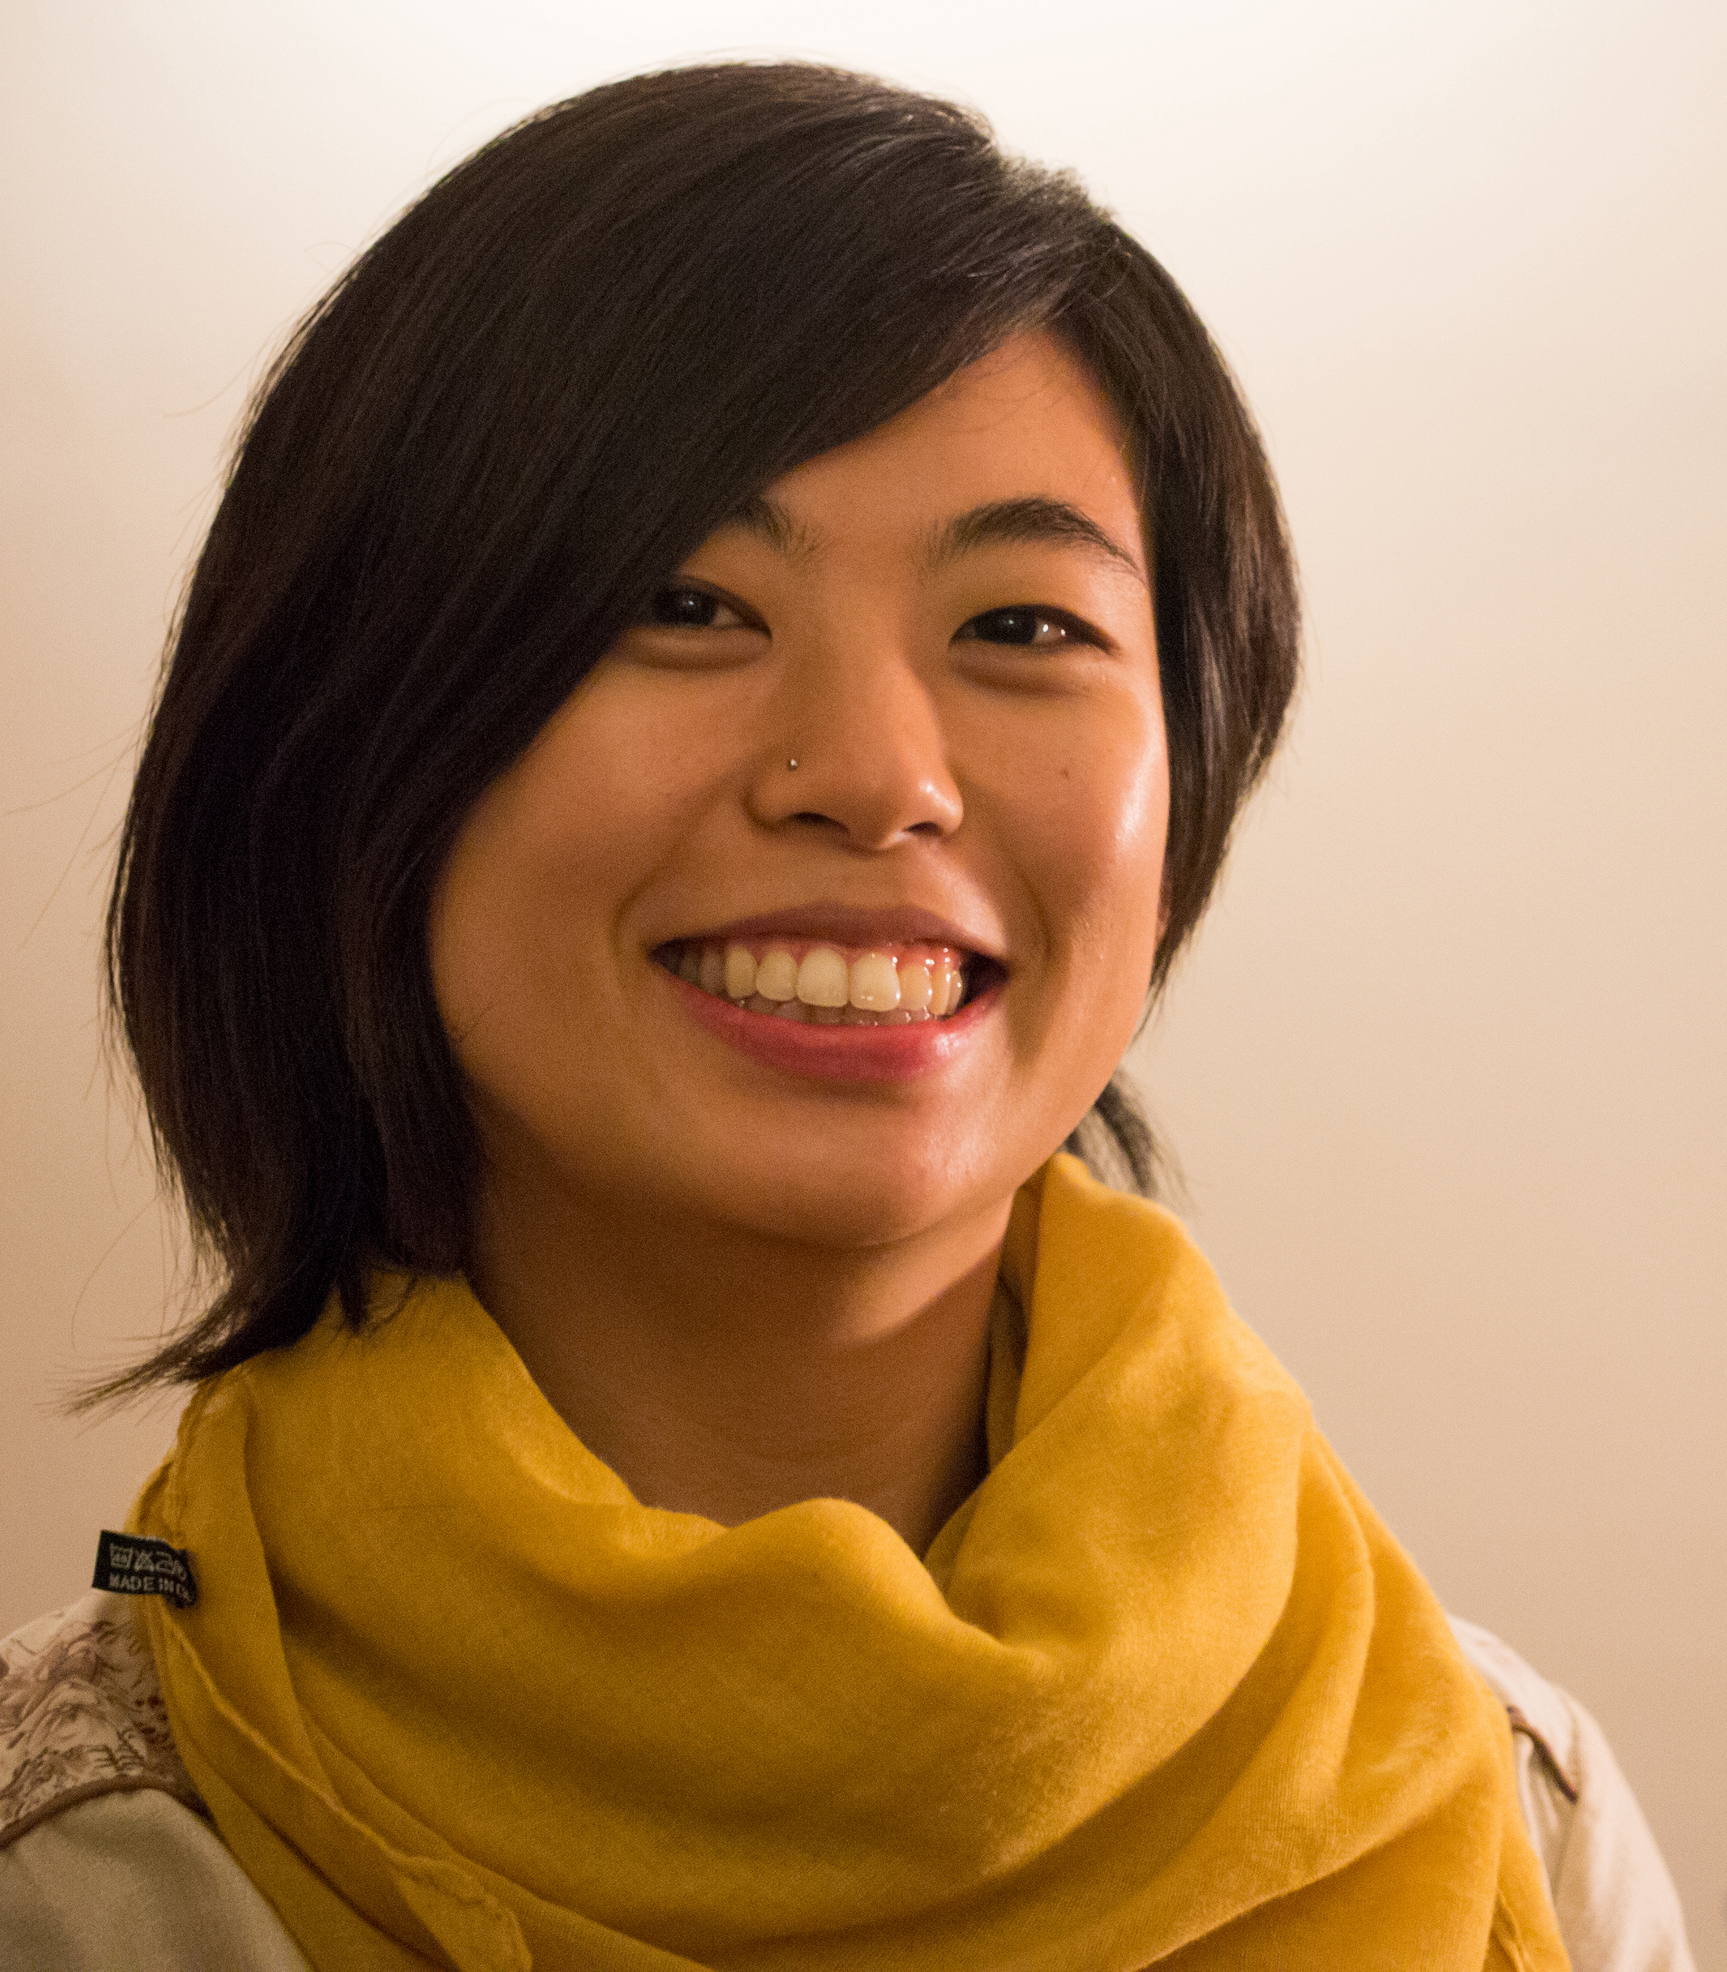 Photograph of Melanie Cherng